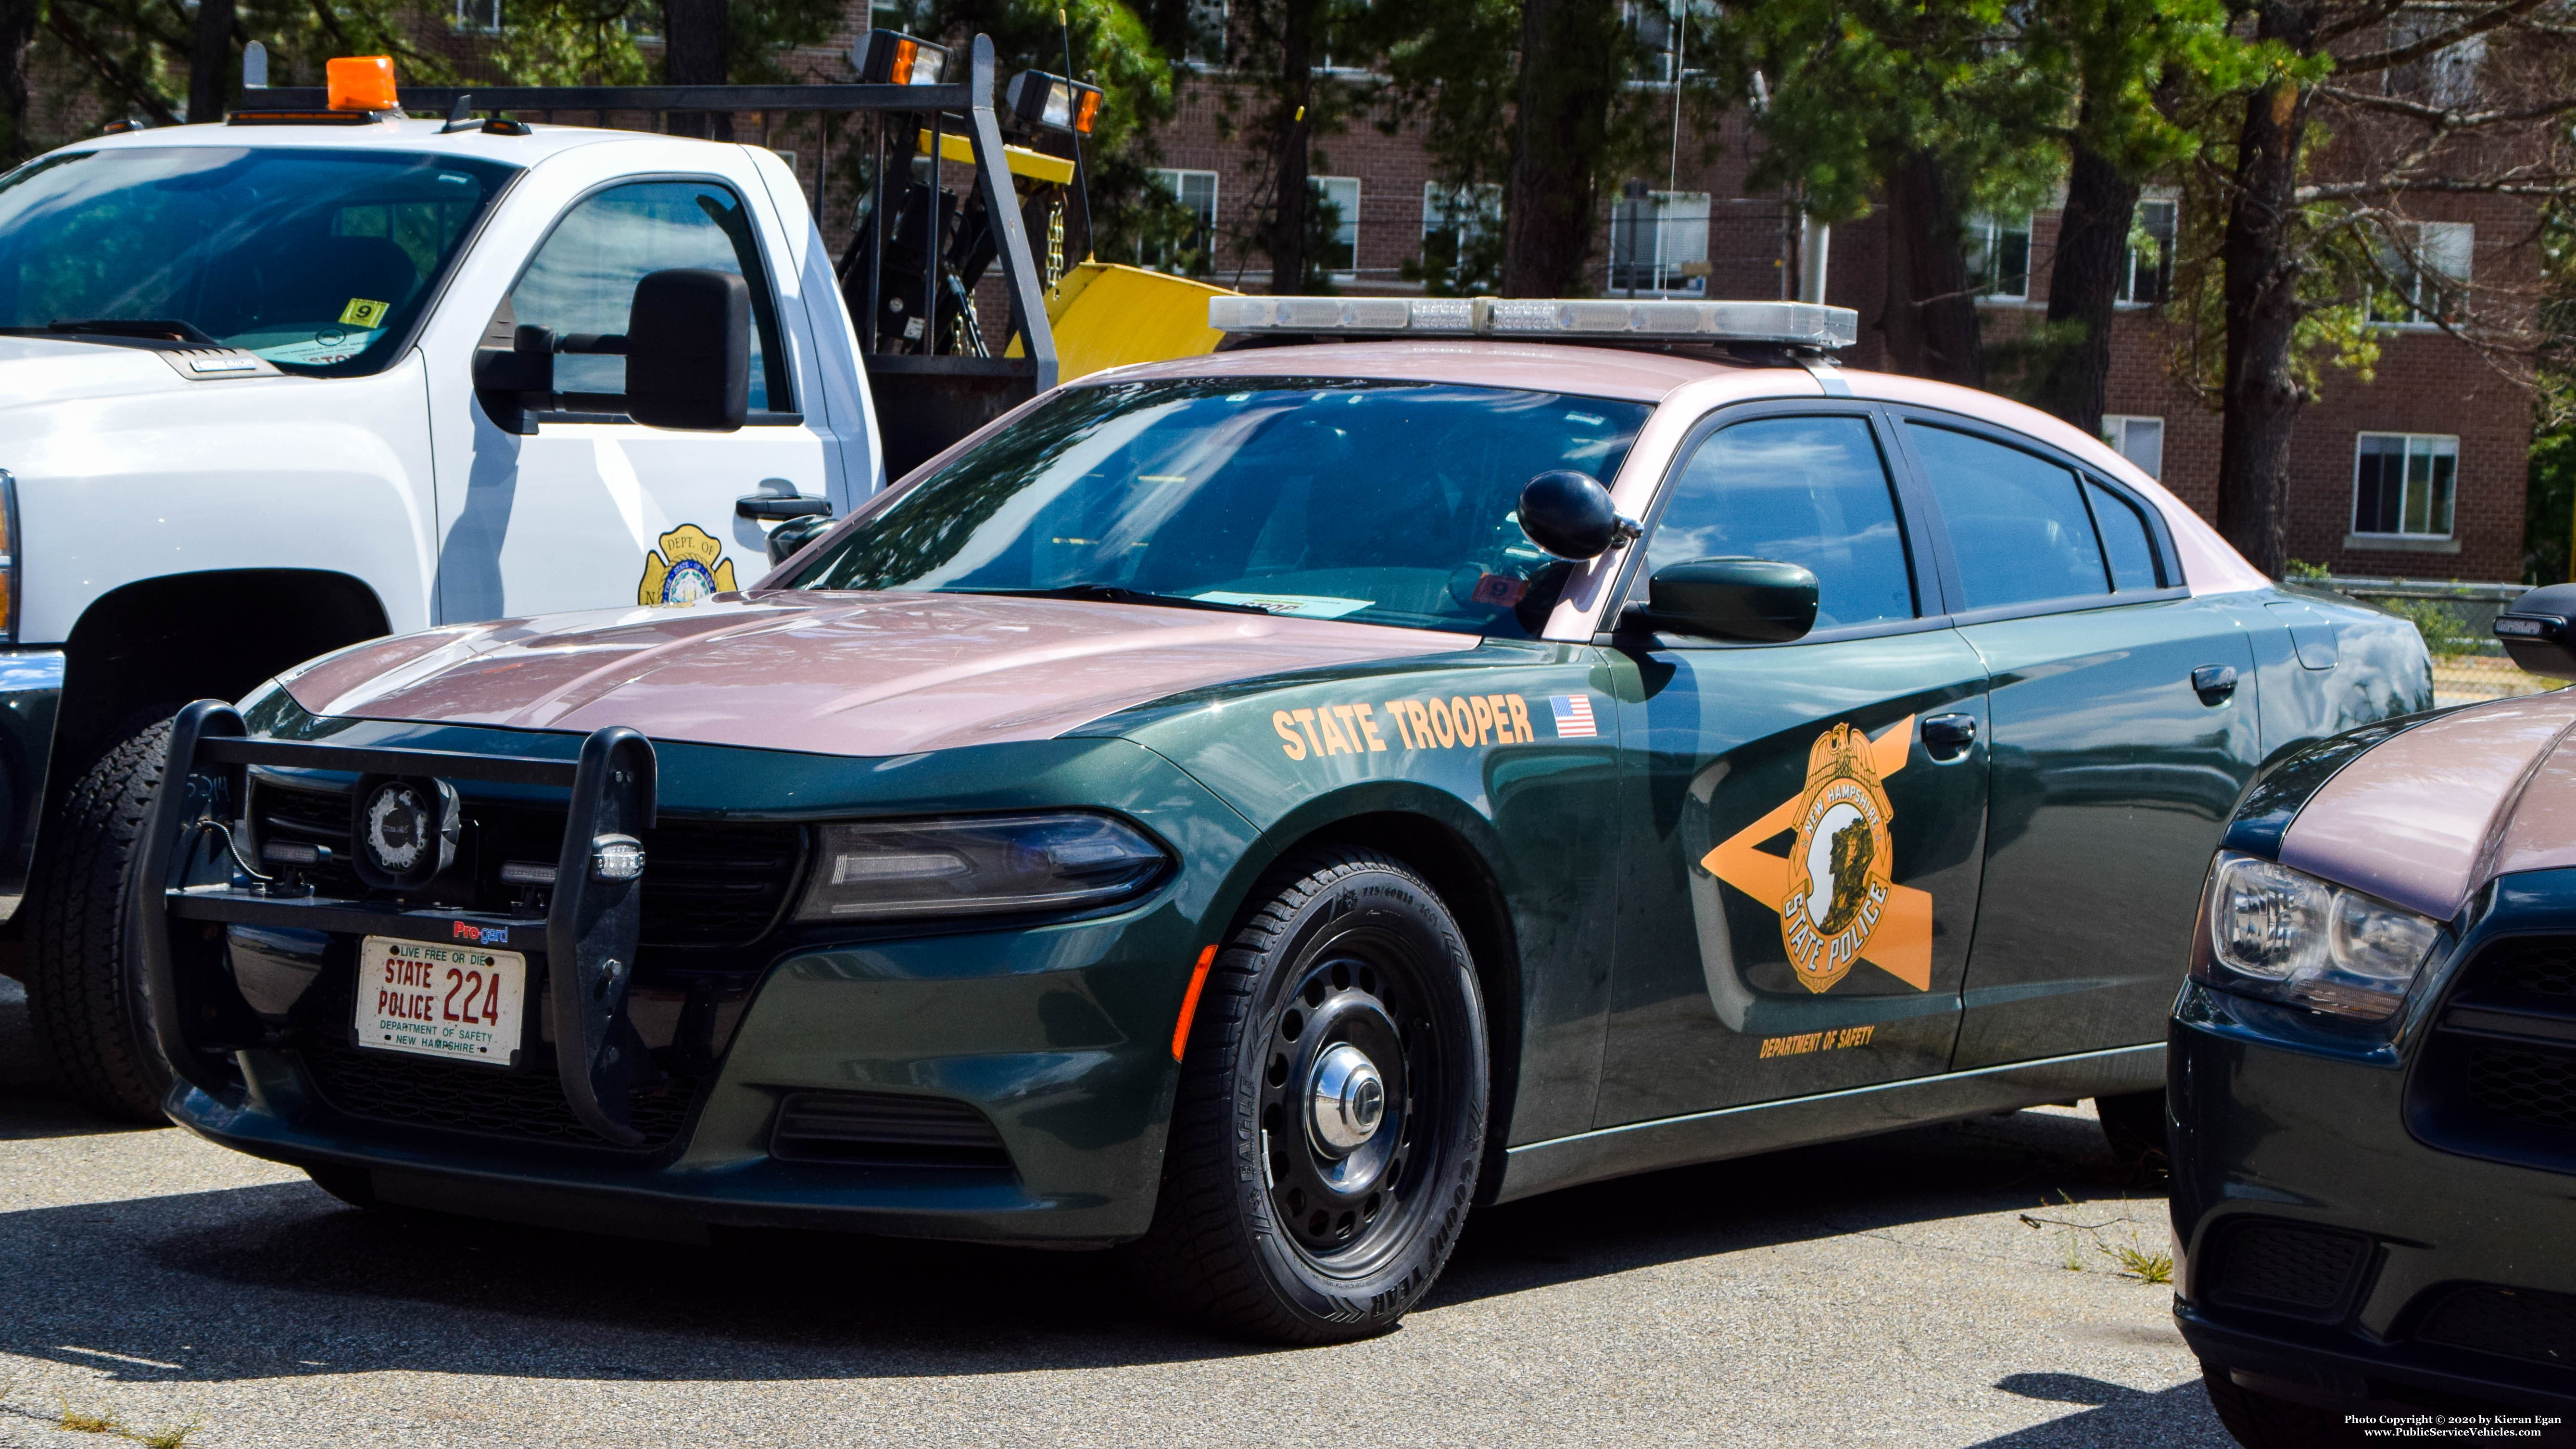 A photo  of New Hampshire State Police
            Cruiser 224, a 2015-2019 Dodge Charger             taken by Kieran Egan